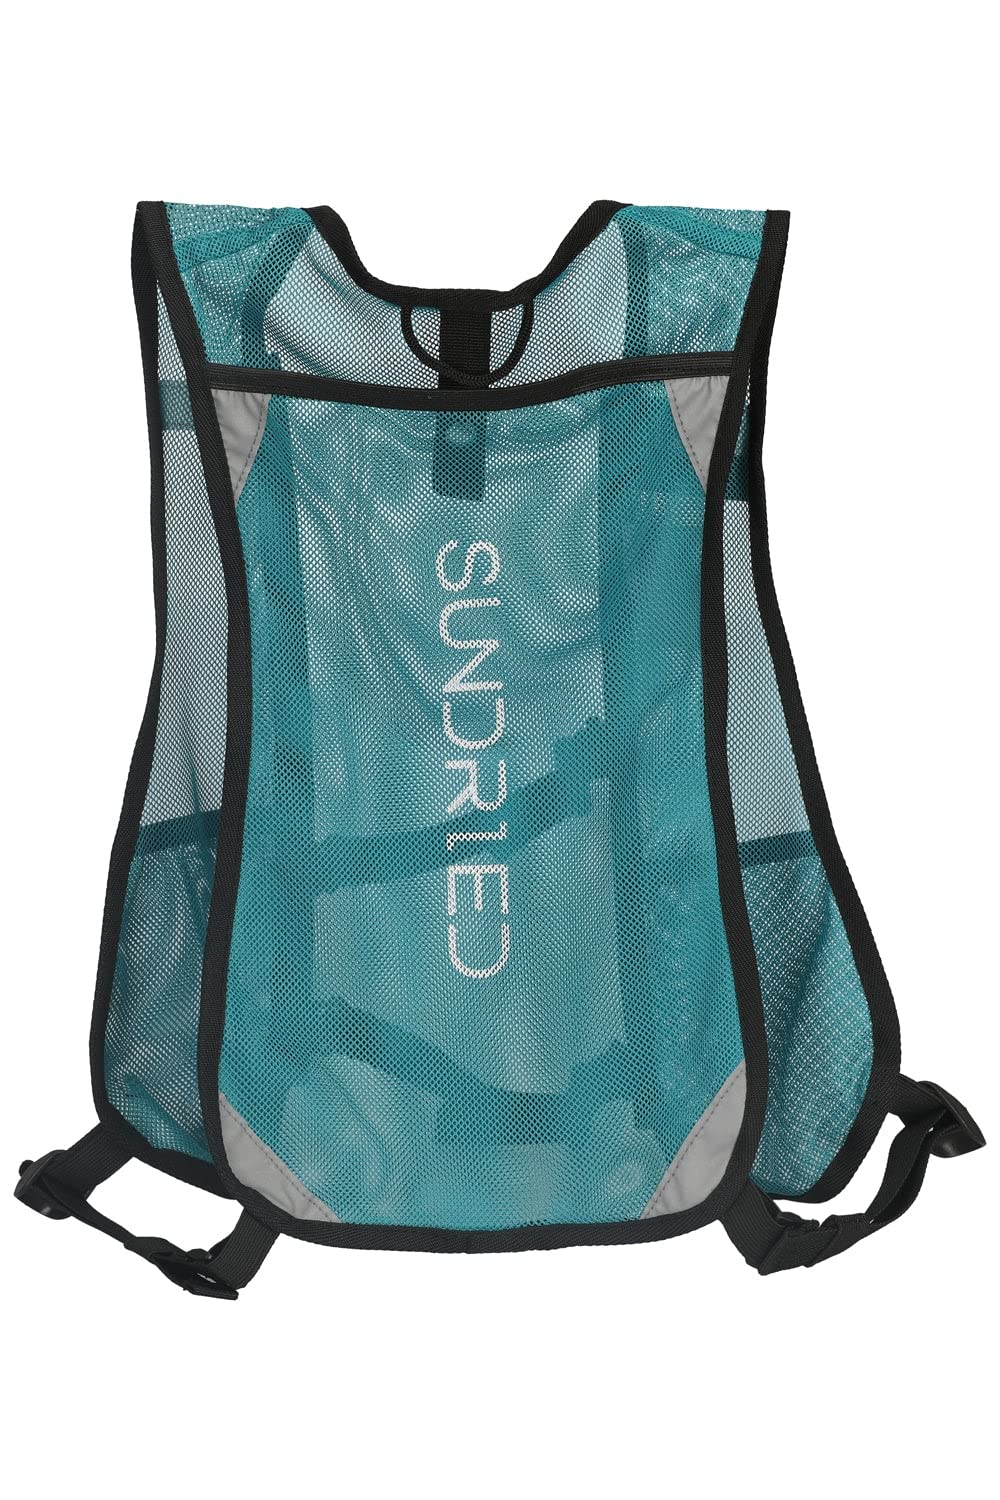 Sundried Mesh Backpack Hydration Bag for Trail Running Ultrarunning Hiking Trekking and Cycling